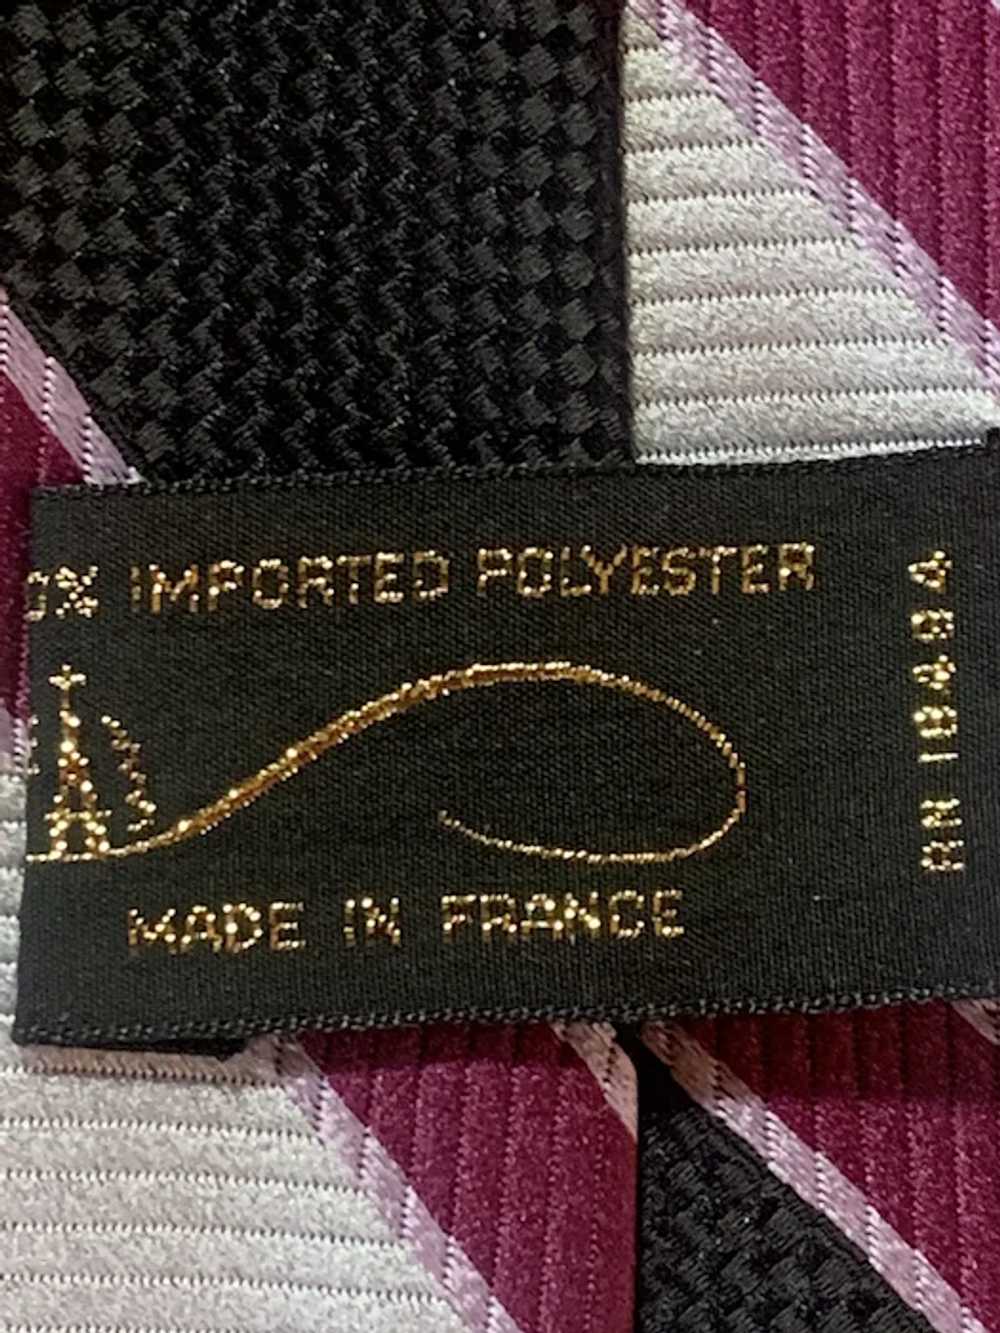 1970's Imported Polyester Tie Made in France - image 6